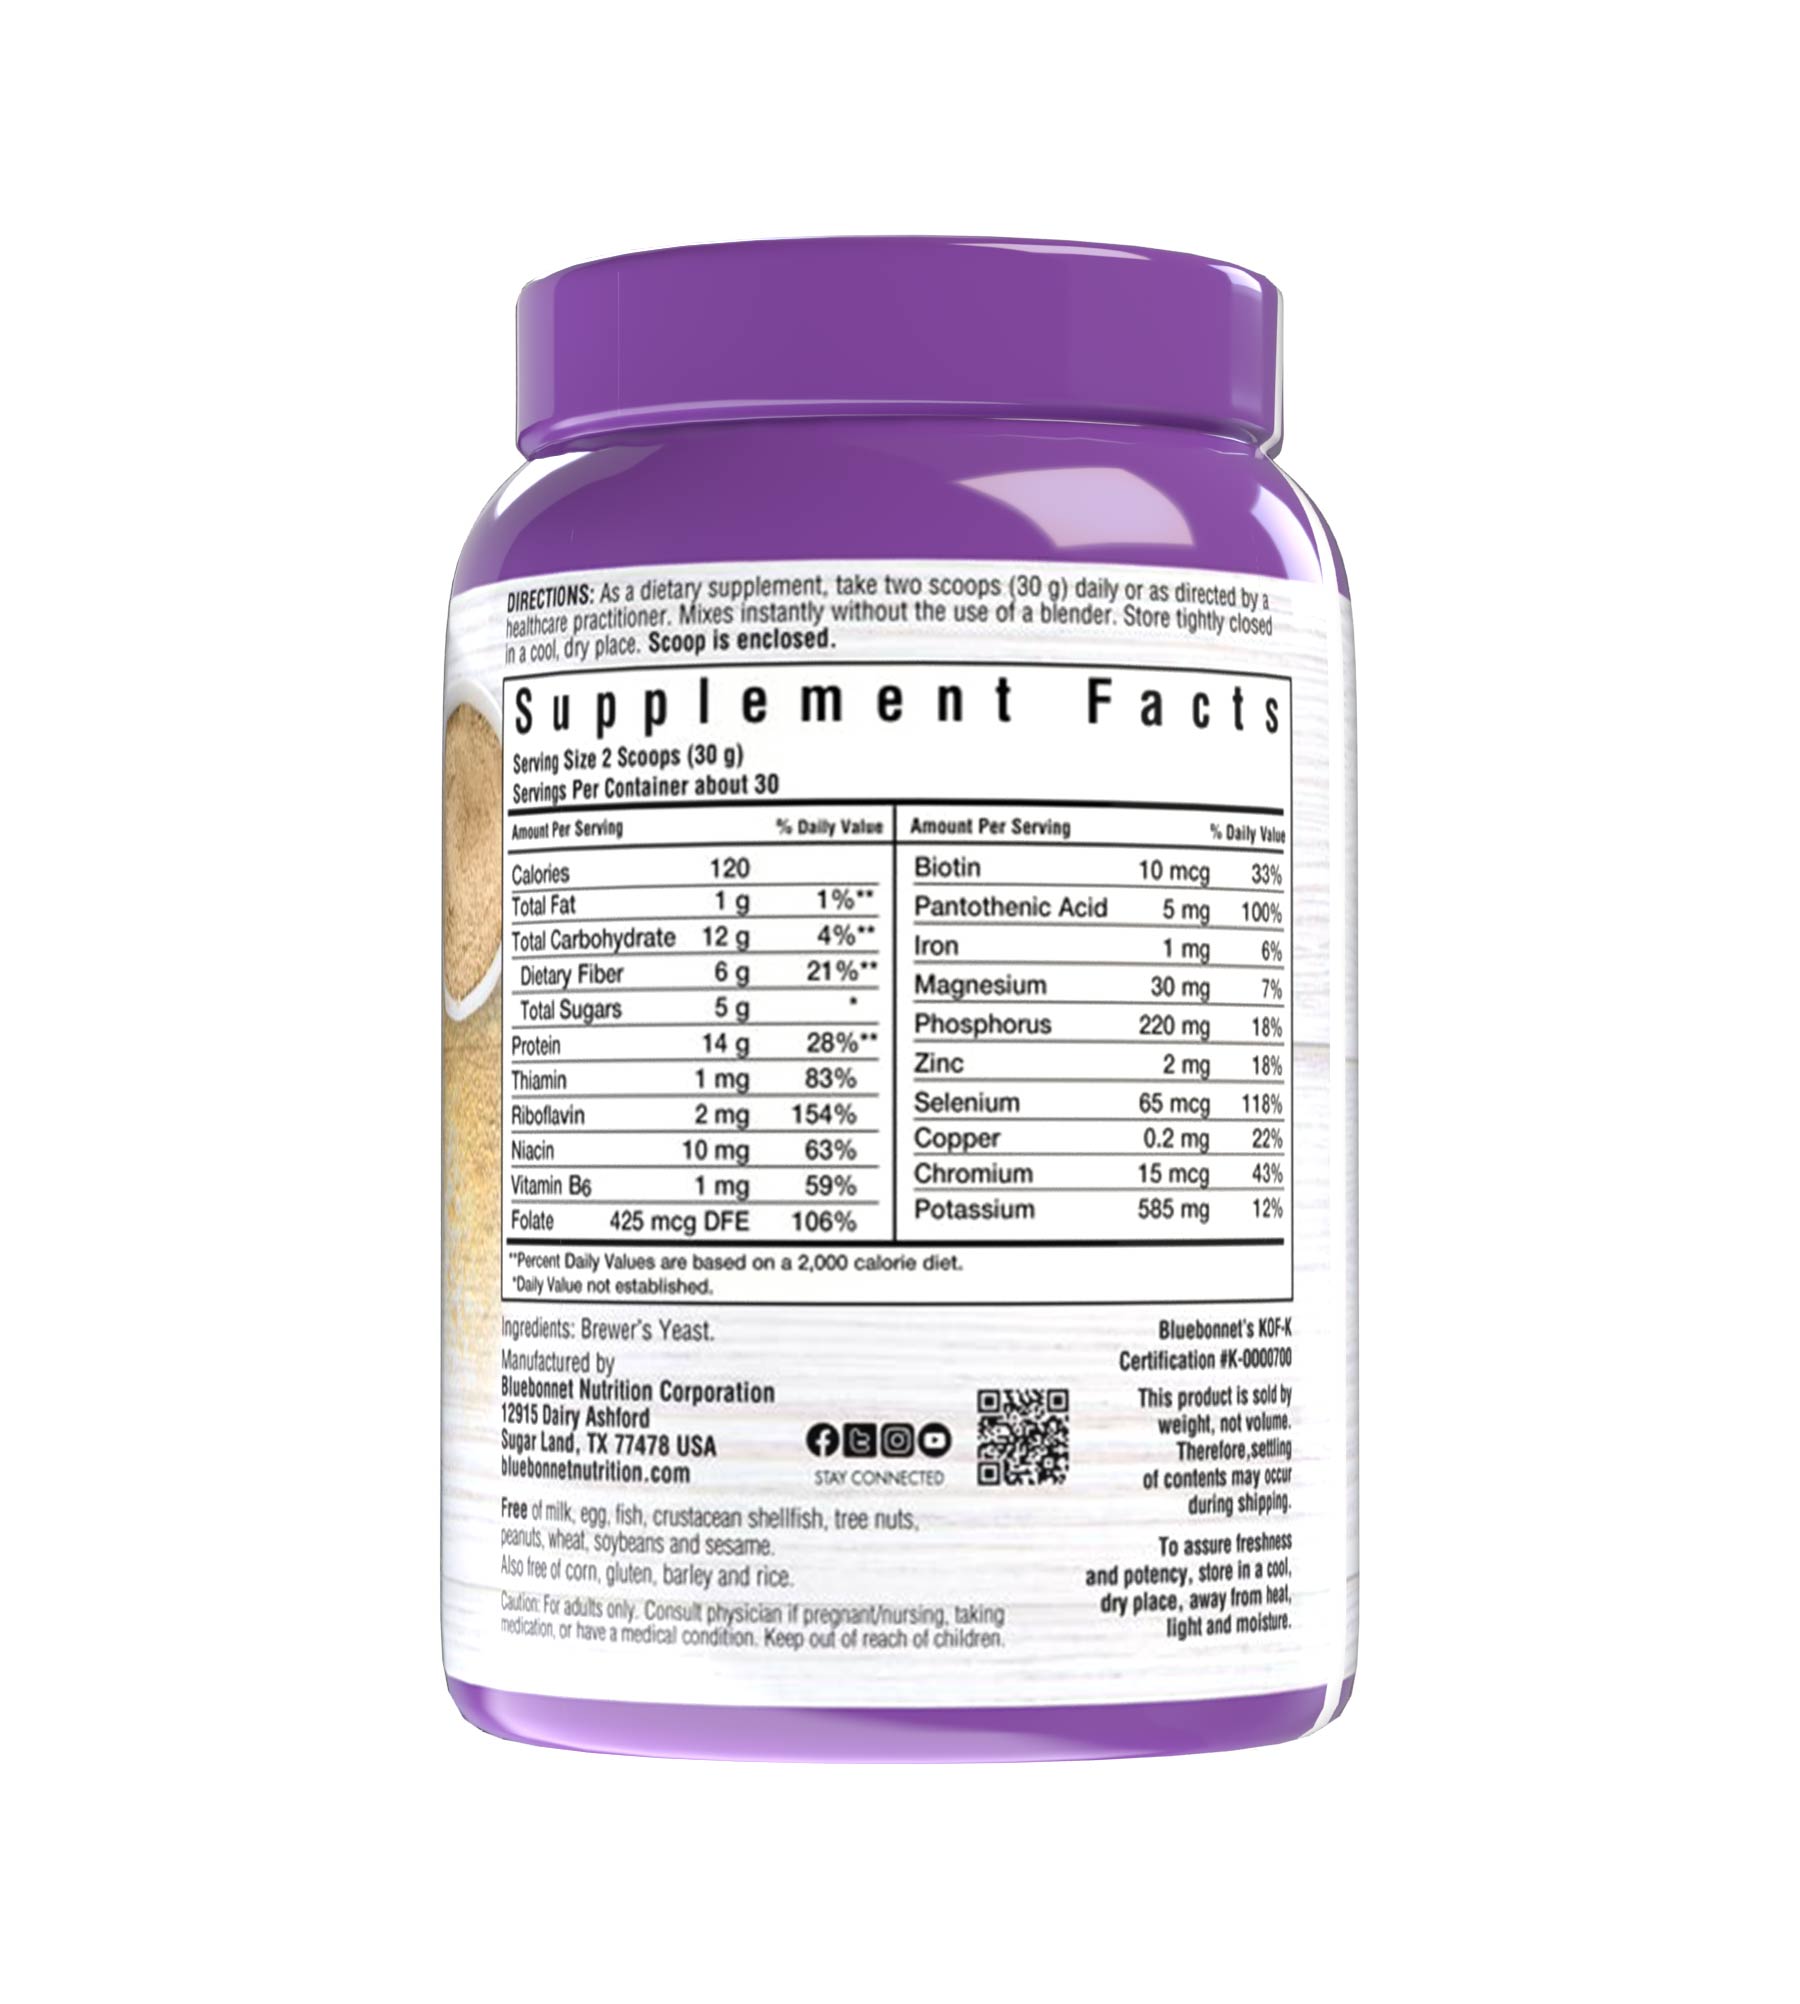 Bluebonnet’s Super Earth® Brewer’s Yeast Powder is formulated with a select strain of Saccharomyces cerevisiae that is carefully grown on certified non-GMO sugar beet molasses instead of the typical grain-derived brewer’s yeast that is recovered from the beer-brewing process. Supplement facts panel. #size_2 lb